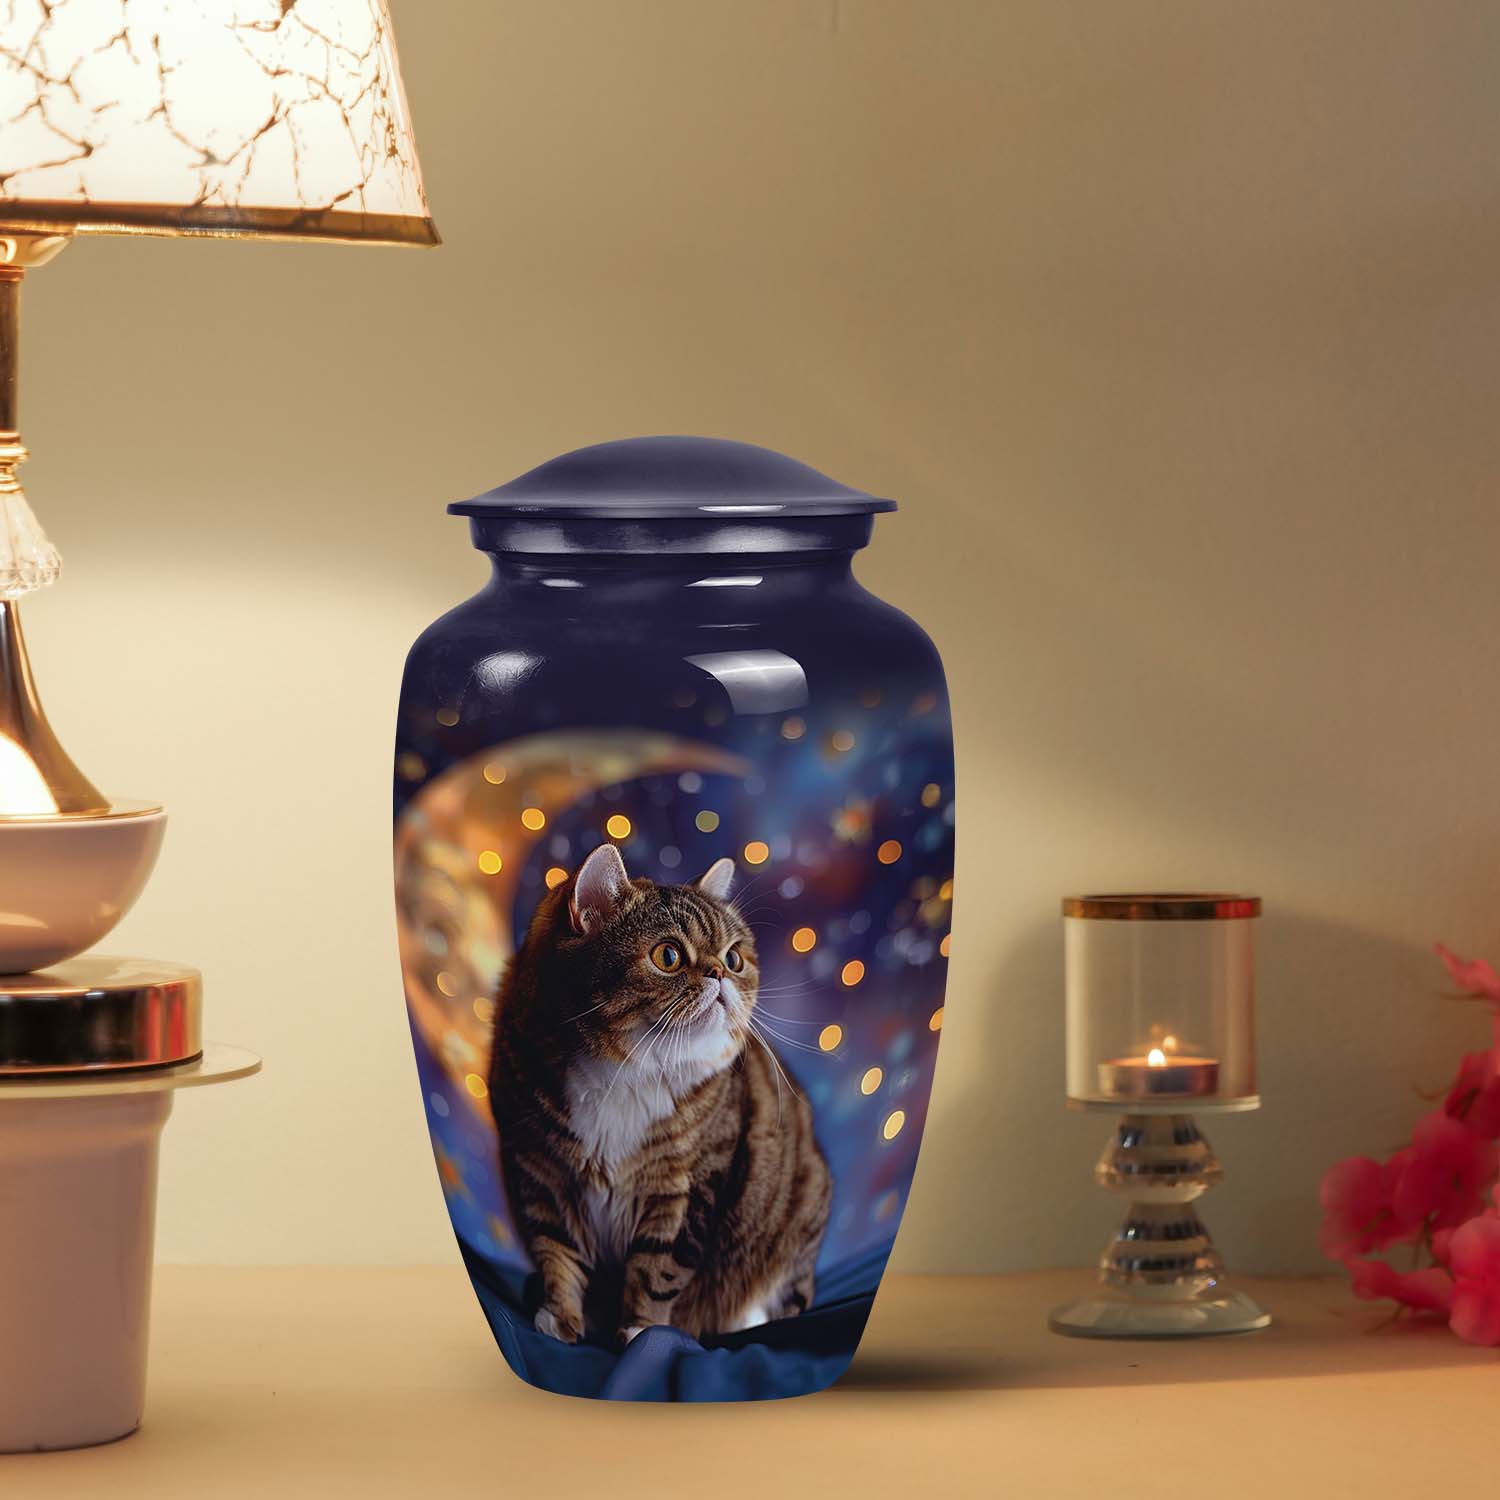 A unique large cat urn with a starry design, perfect as a pet memorial